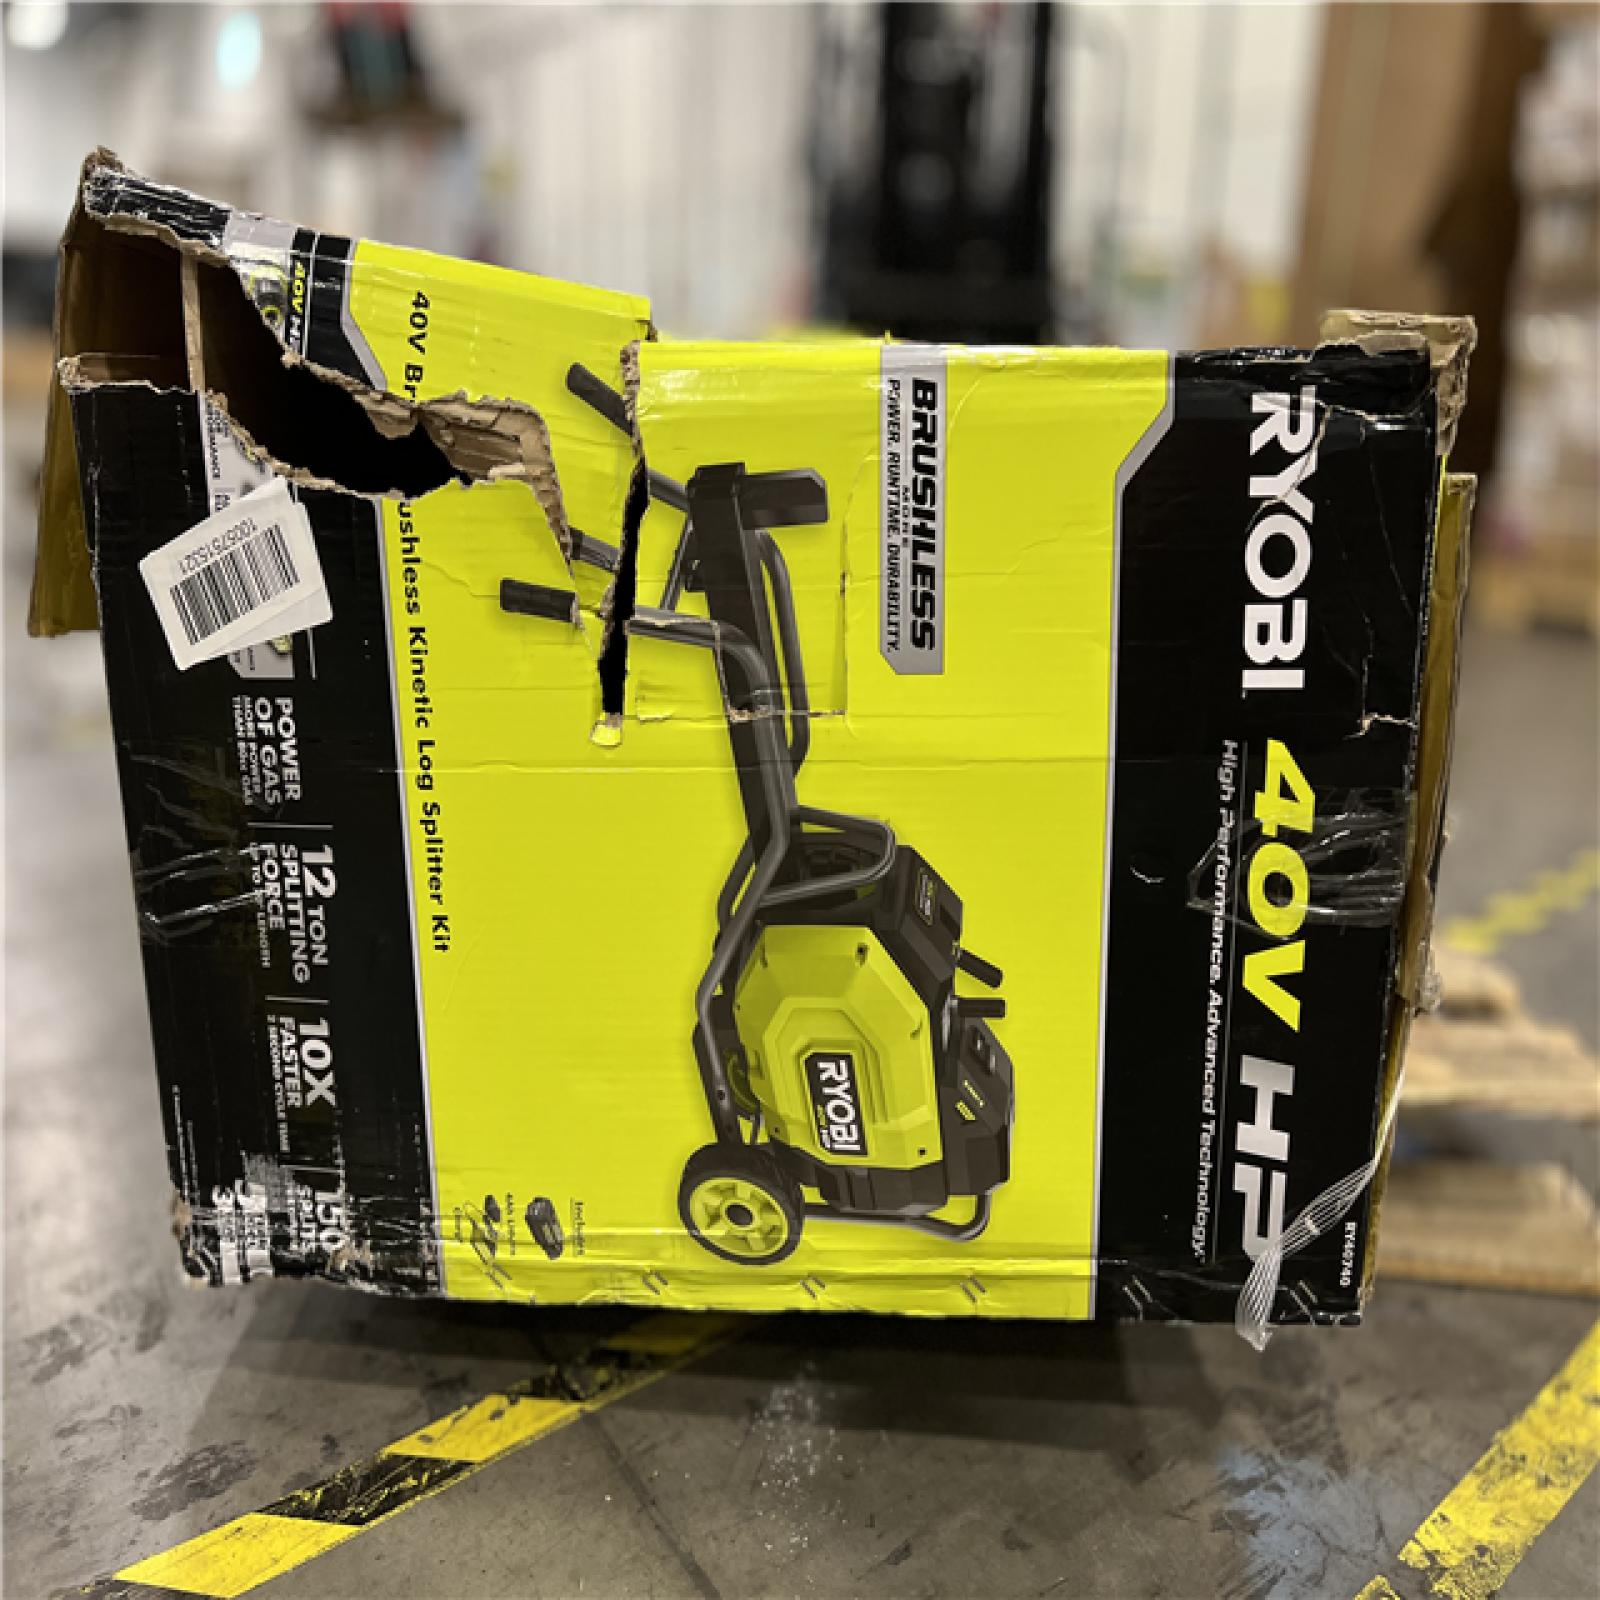 DALLAS LOCATION - RYOBI 40V HP Brushless 12-Ton Kinetic Battery Electric Log Splitter Kit - 4.0Ah Battery and Charger Included